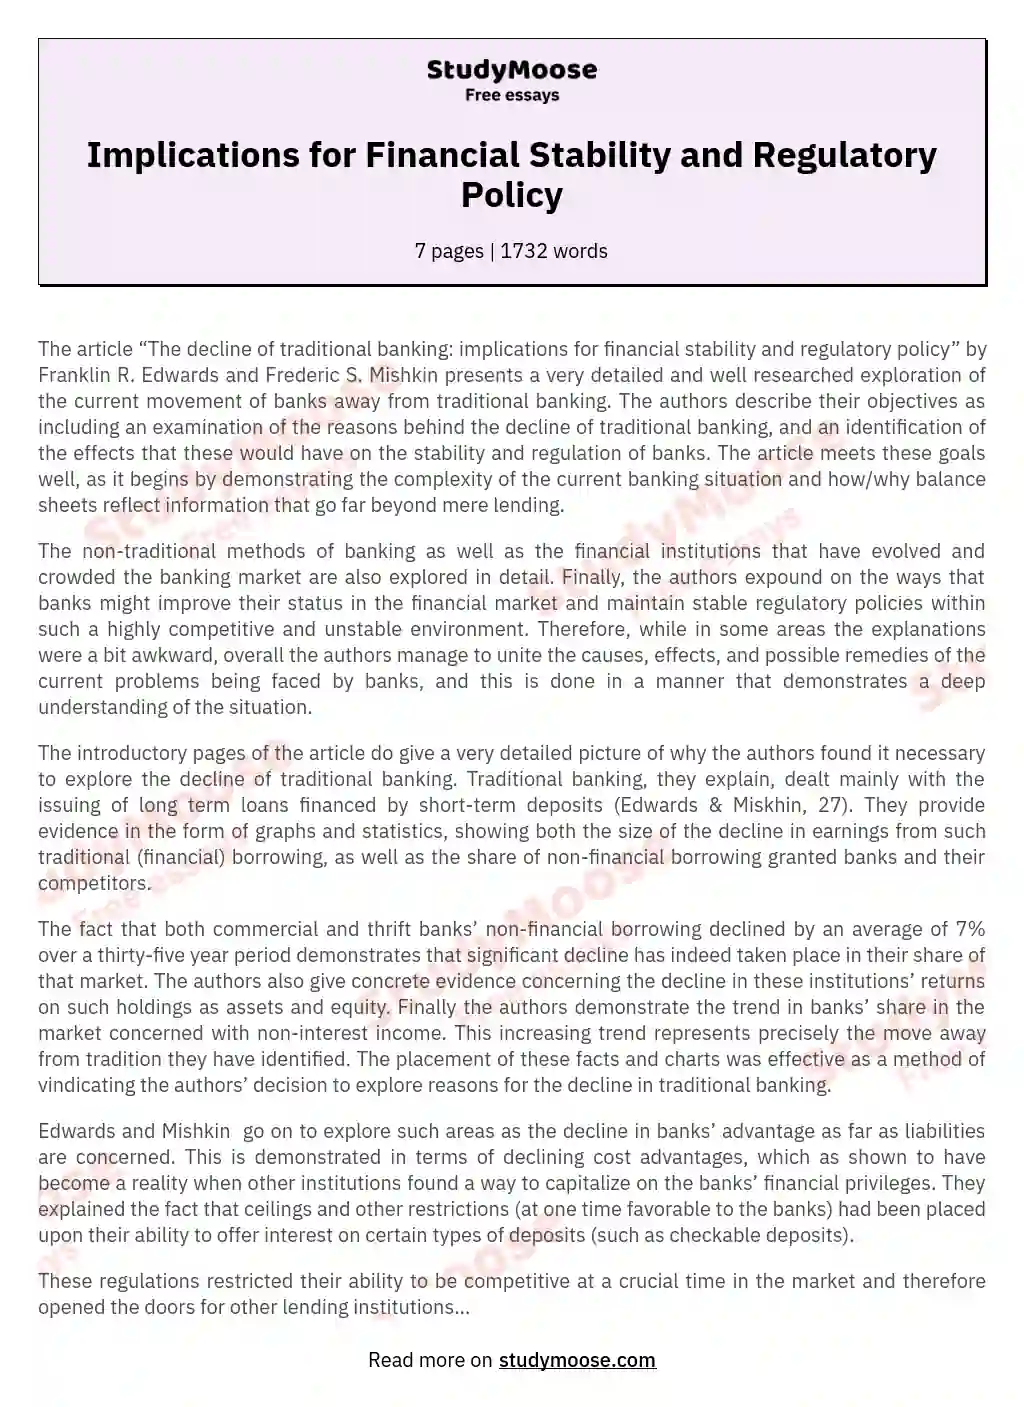 Implications for Financial Stability and Regulatory Policy essay